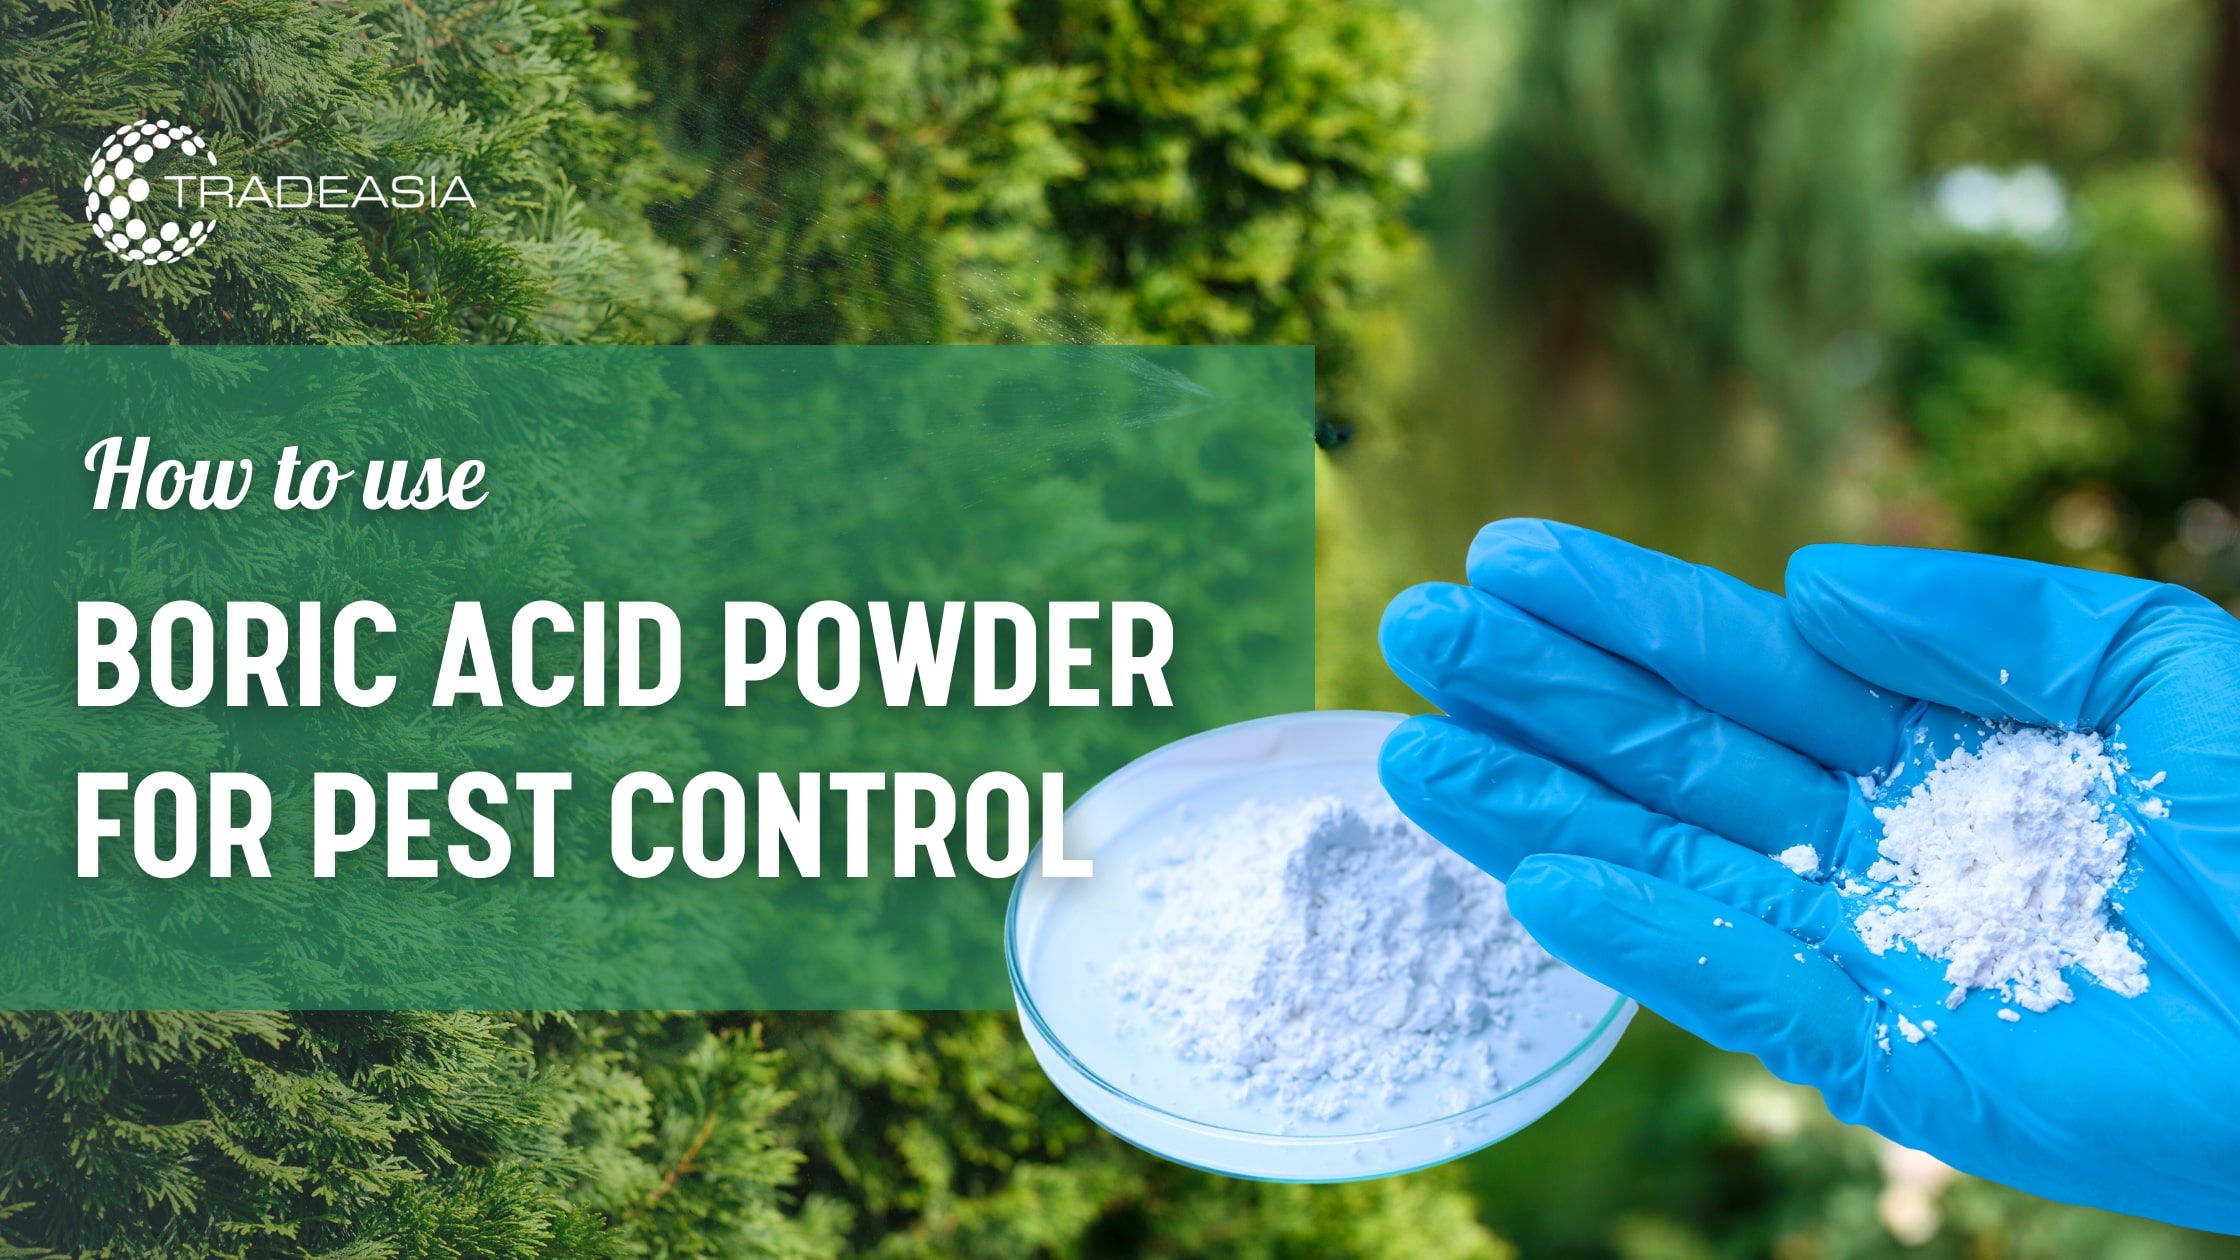 How to Use Boric Acid Powder for Pest Control